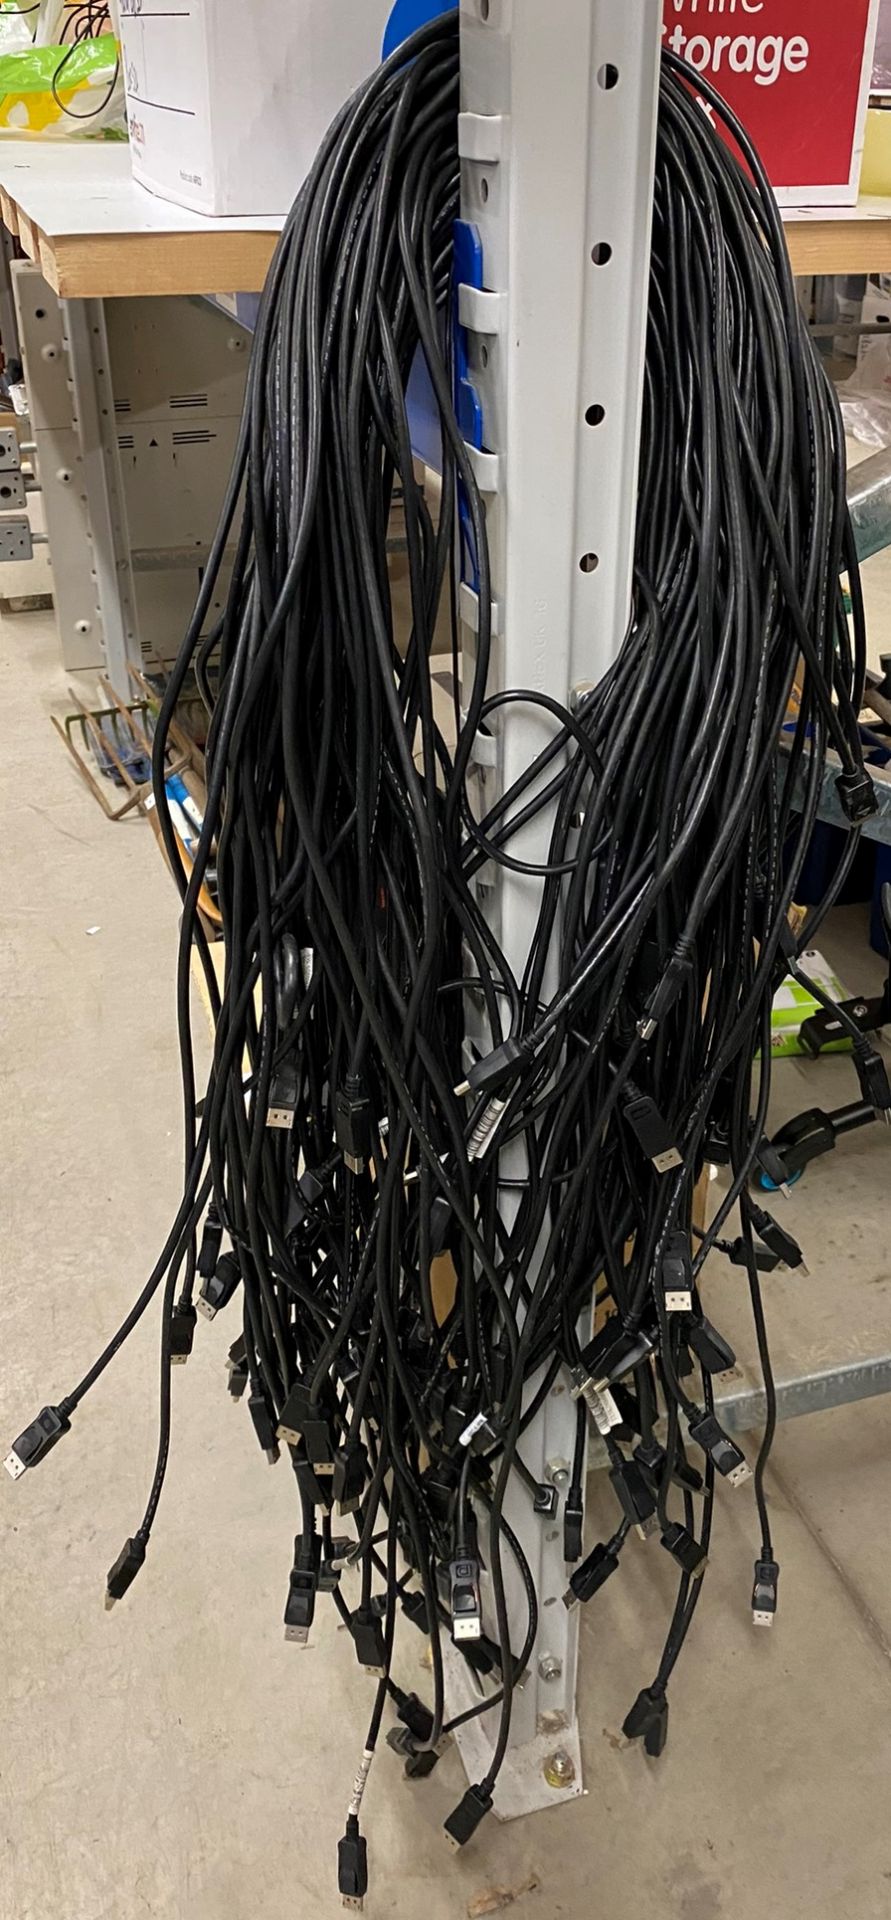 30 x Assorted Display Port Leads